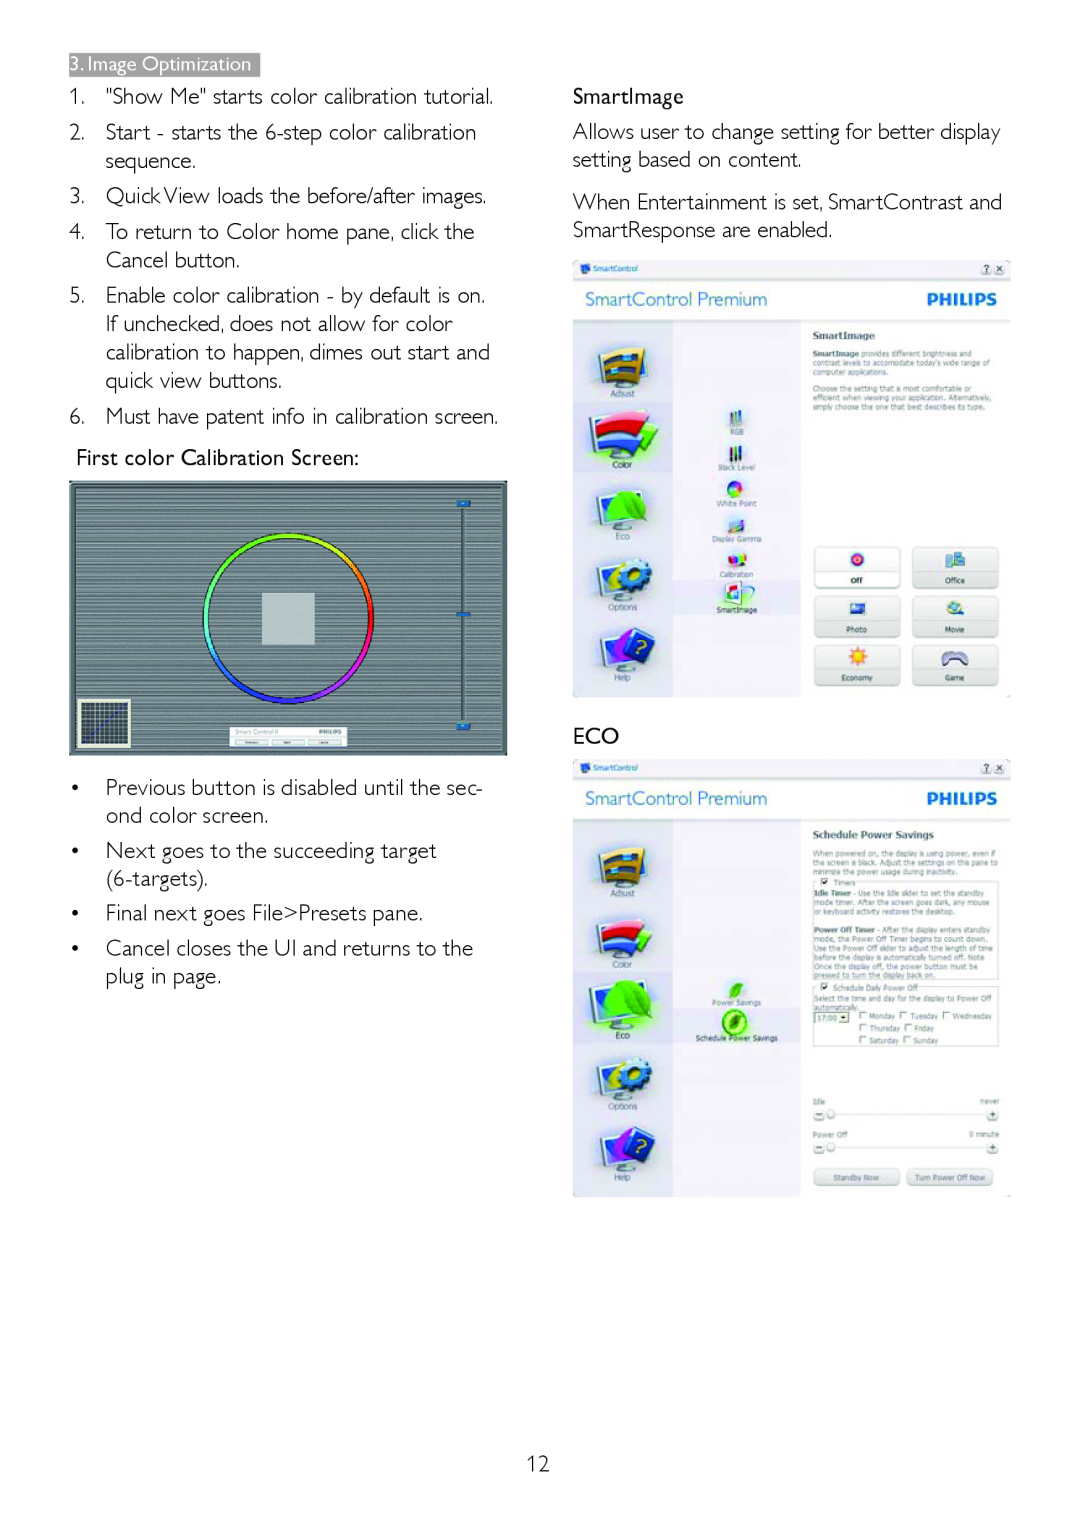 Philips 209CL2 user manual Show Me starts color calibration tutorial 